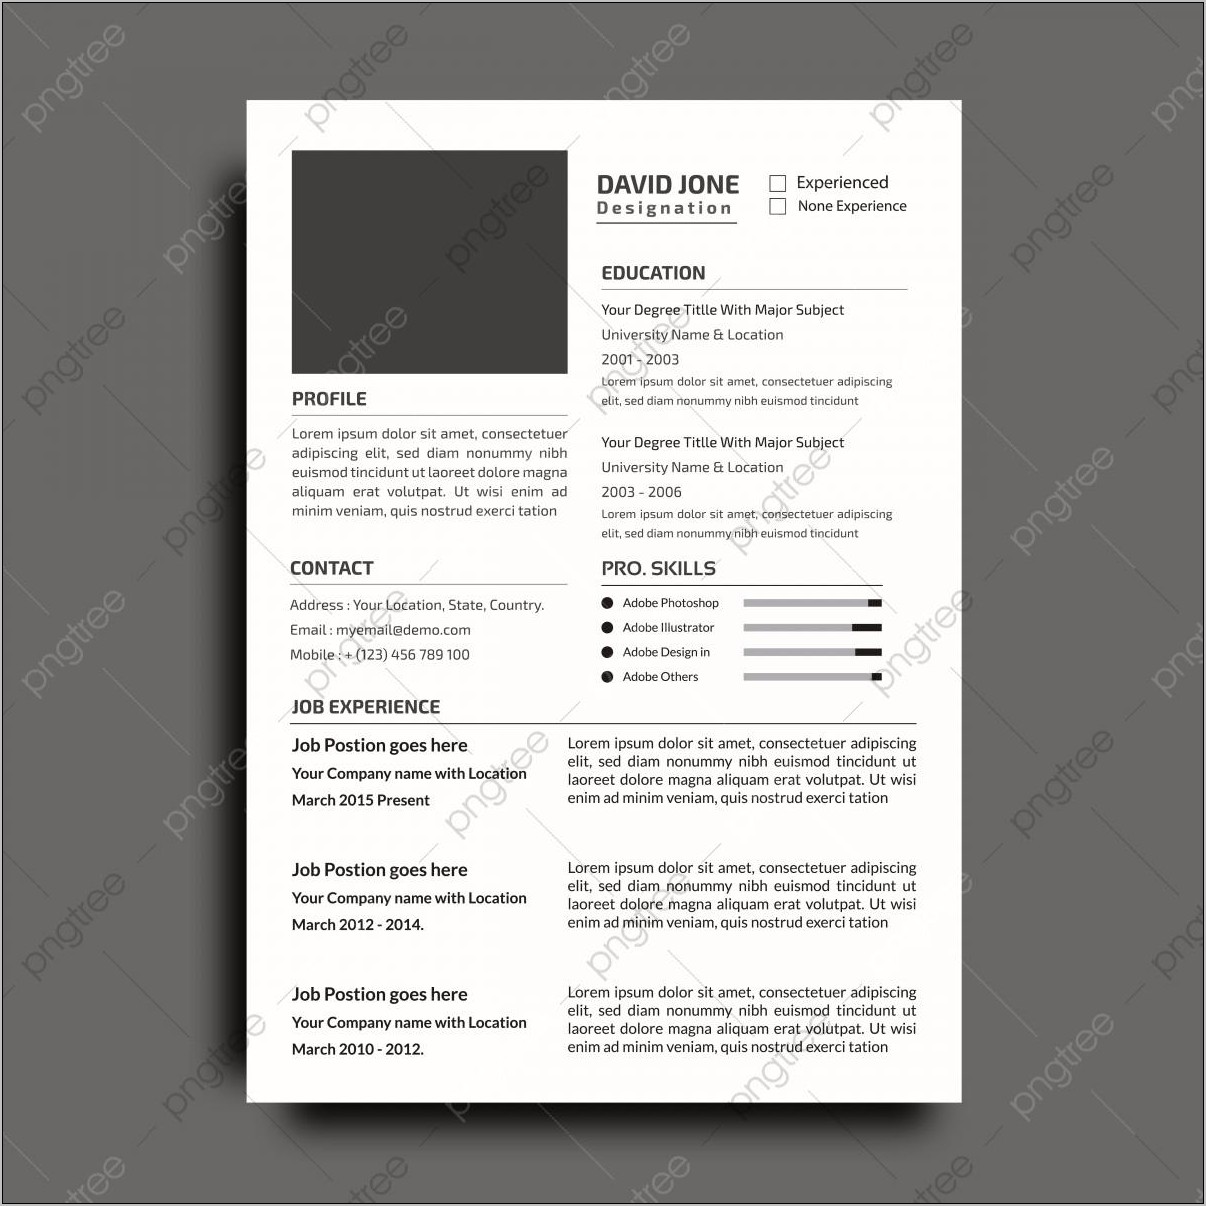 Professional Resume Word Free Download